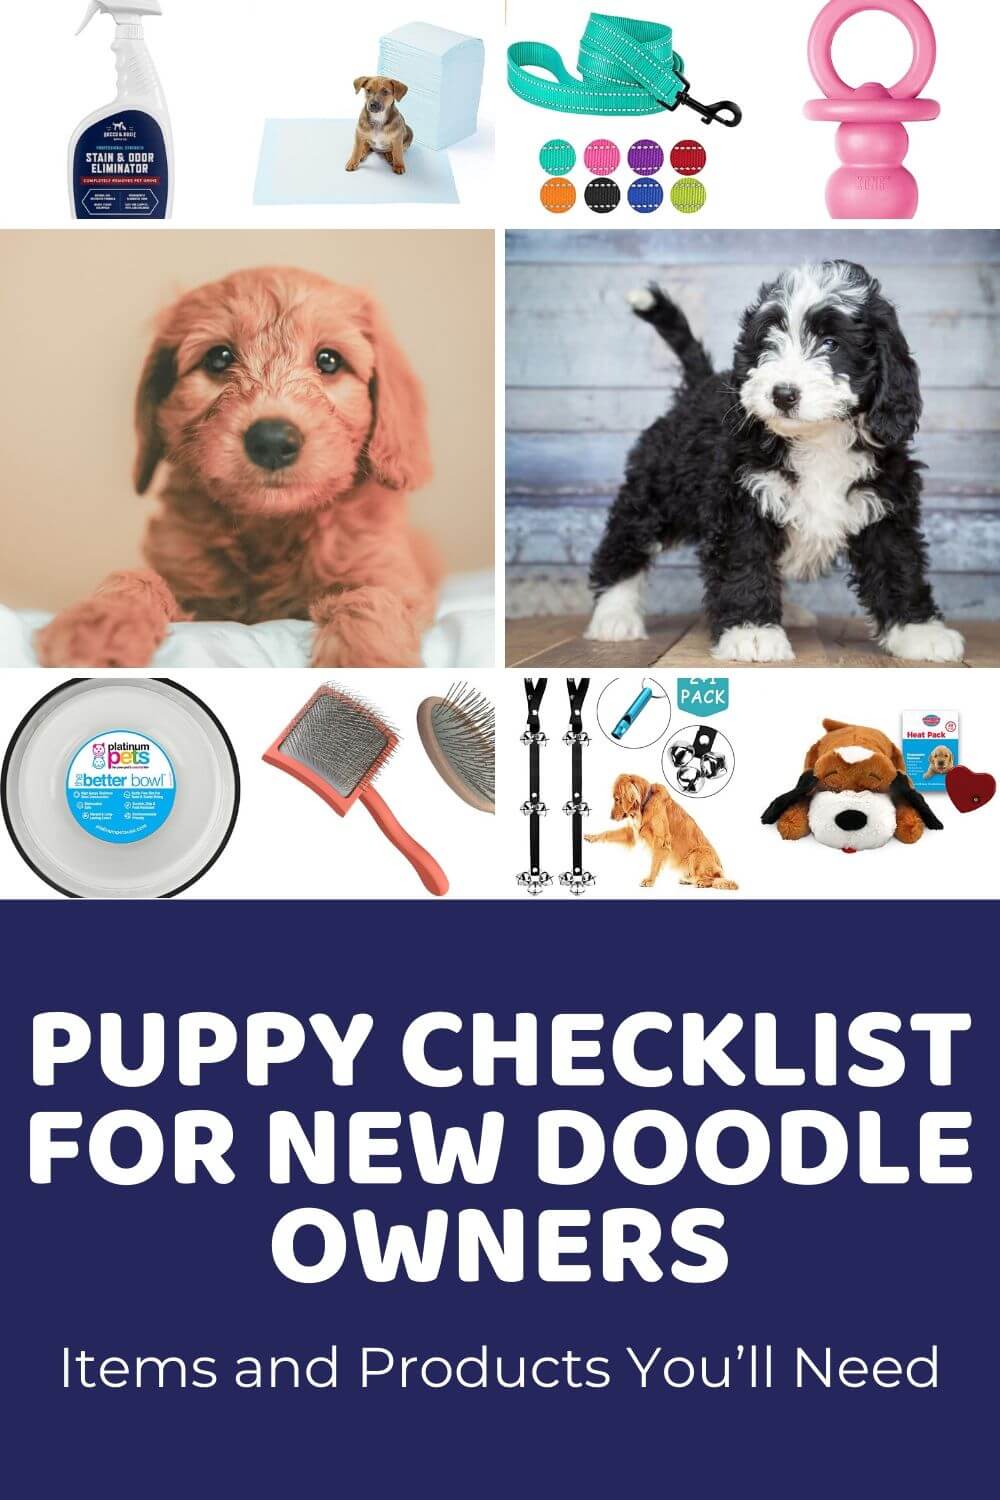 Puppy Checklist for New Doodle Owners_ Items and Products You’ll Need